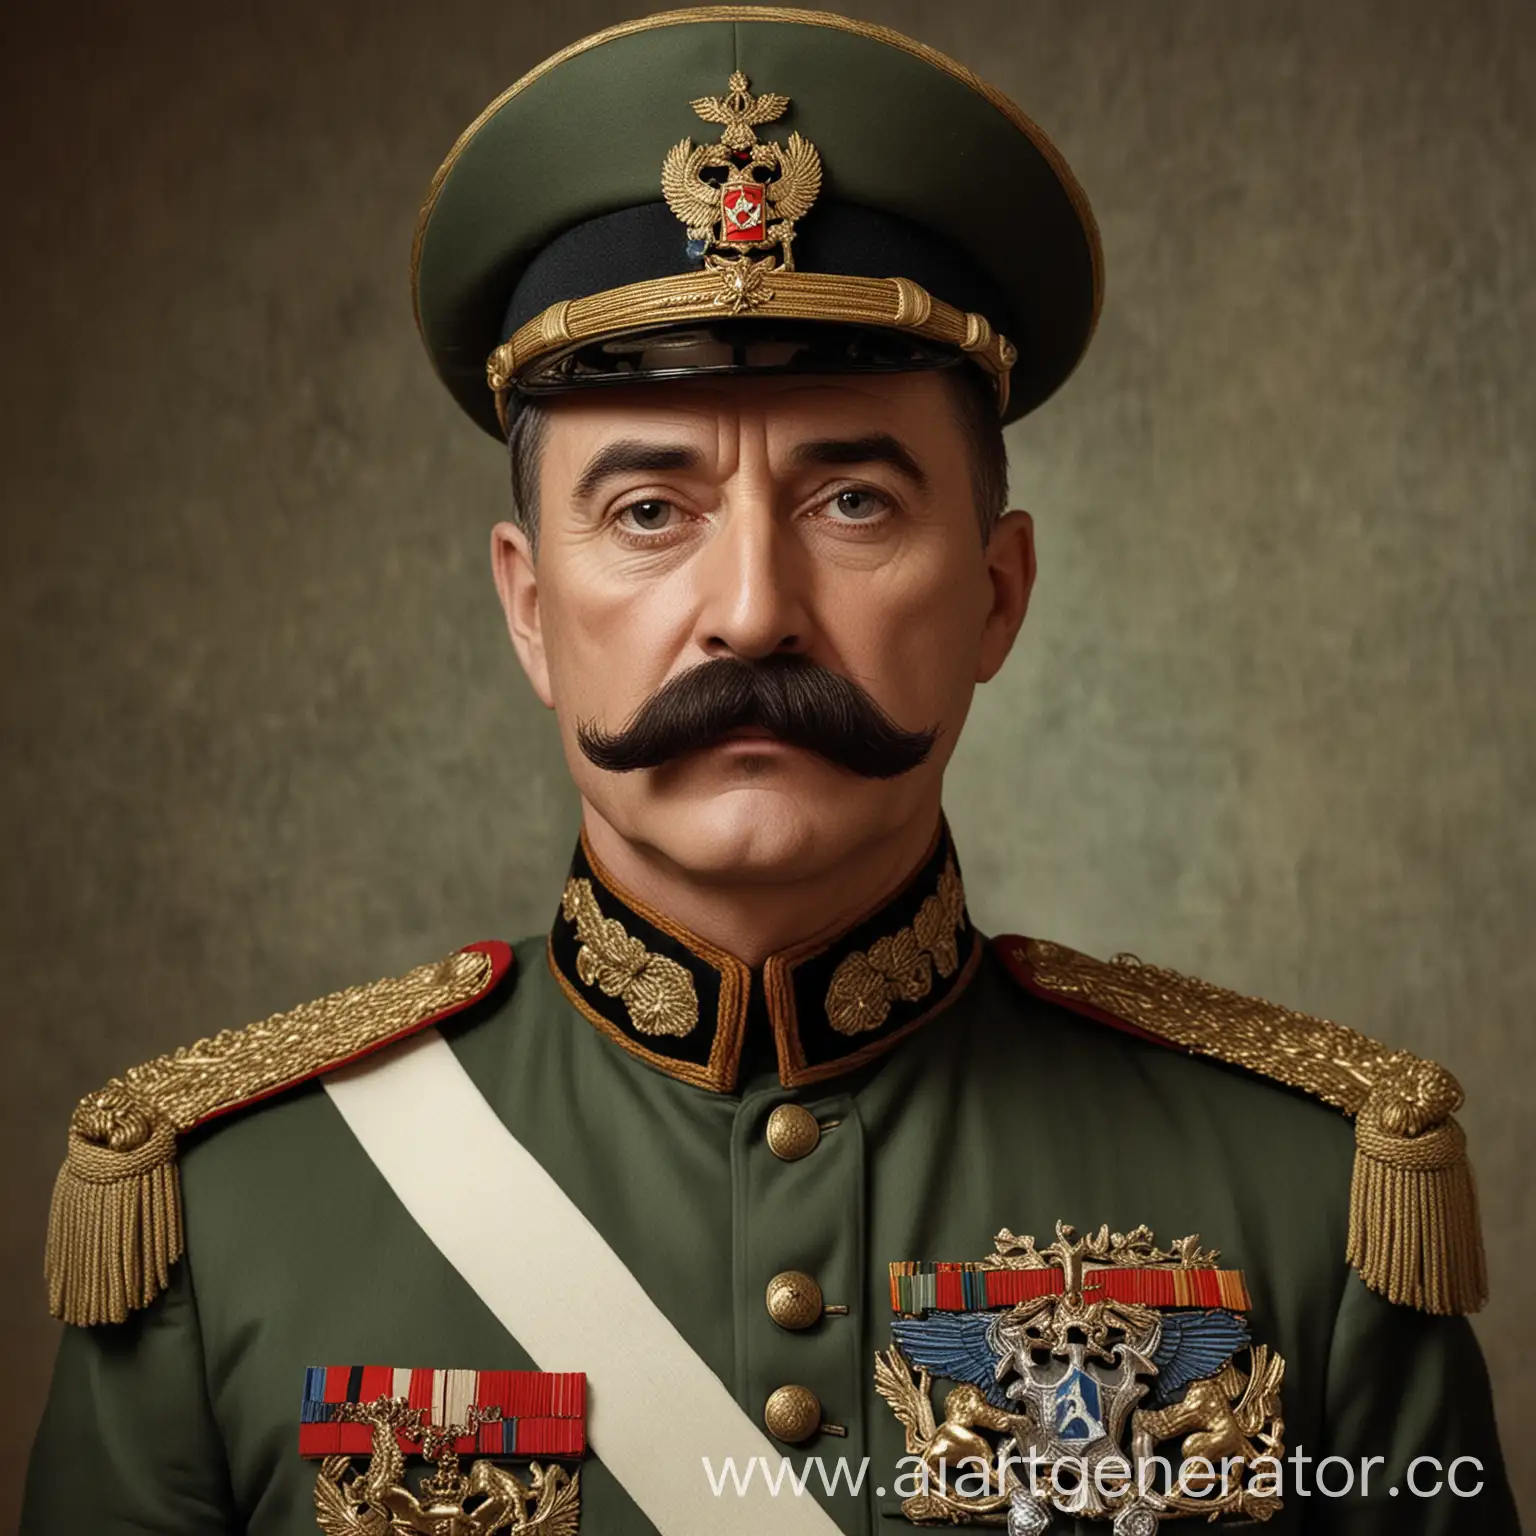 Authoritative-General-with-Striking-Mustache-and-EmblemAdorned-Uniform